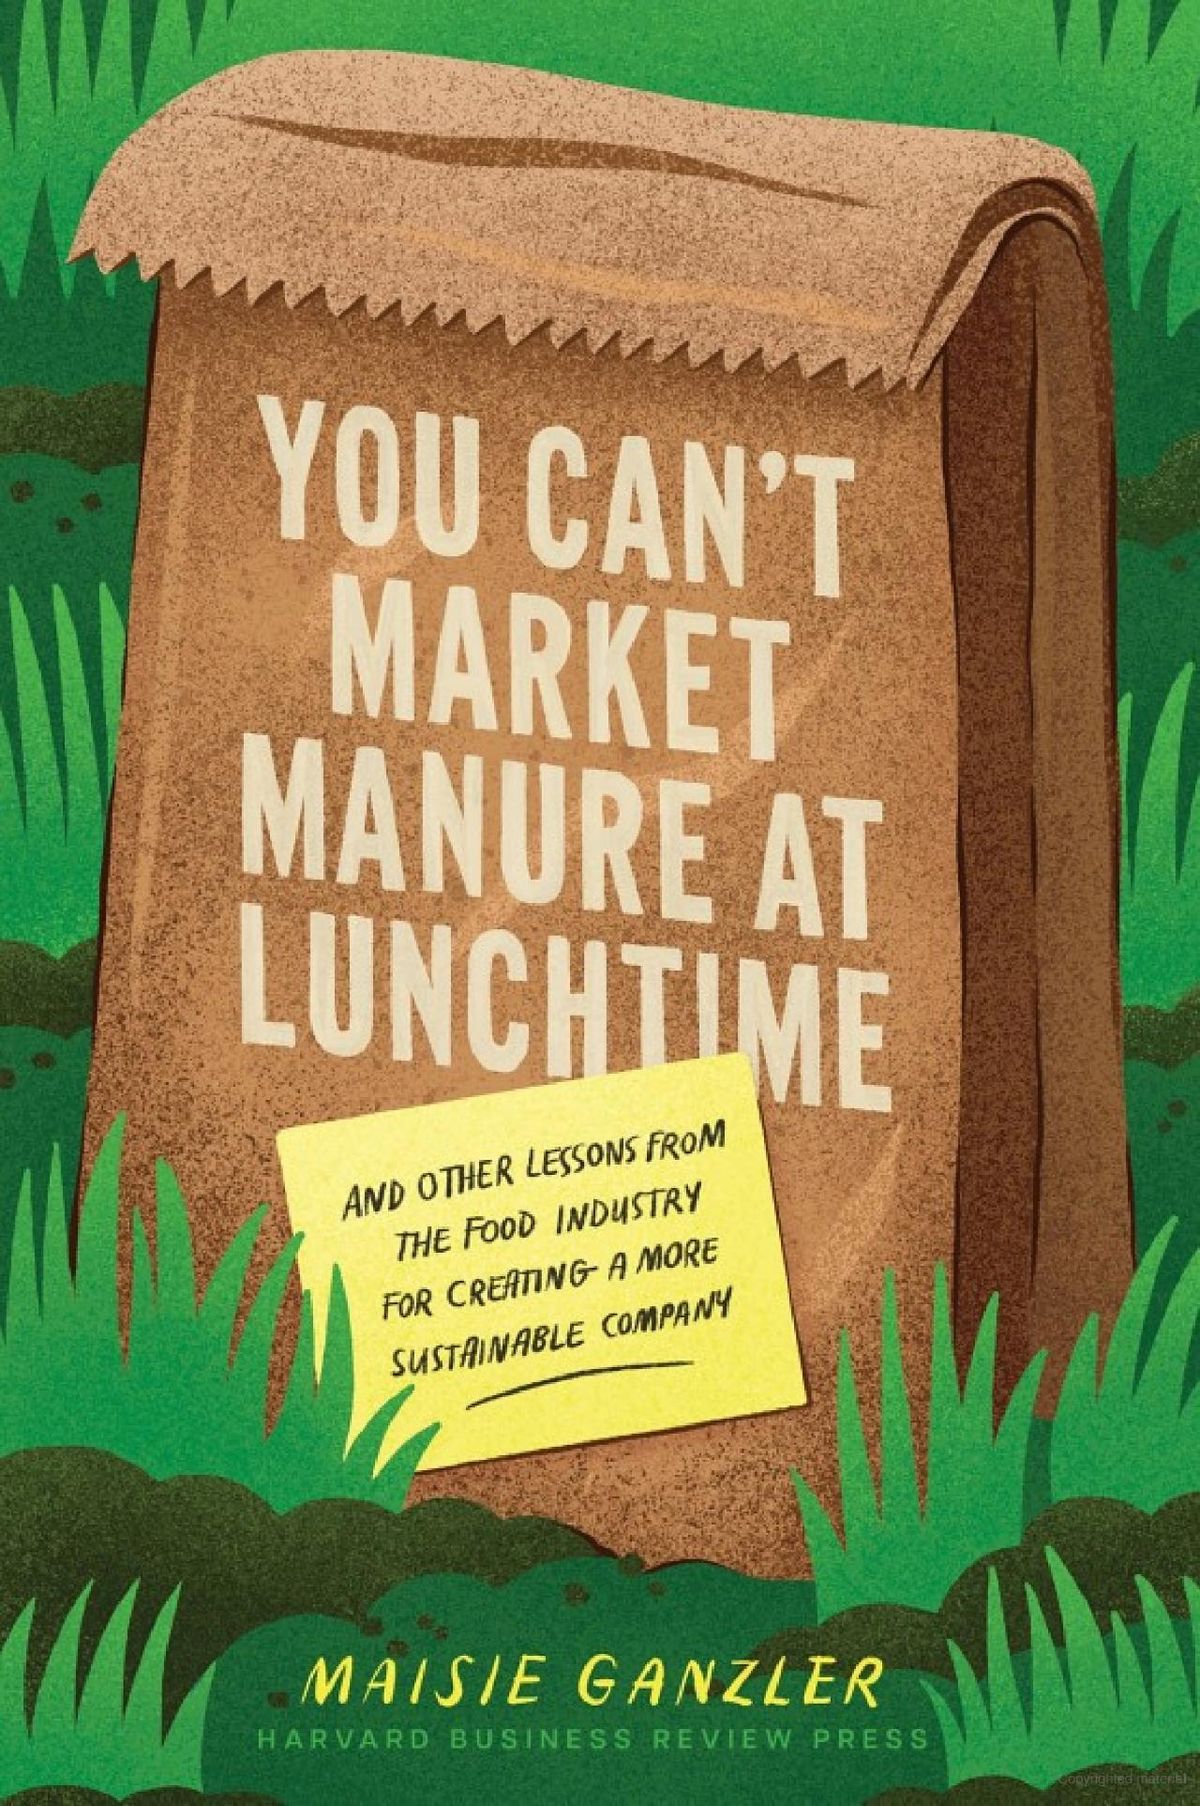 Maisie Ganzler: You Can't Market Manure at Lunchtime book talk